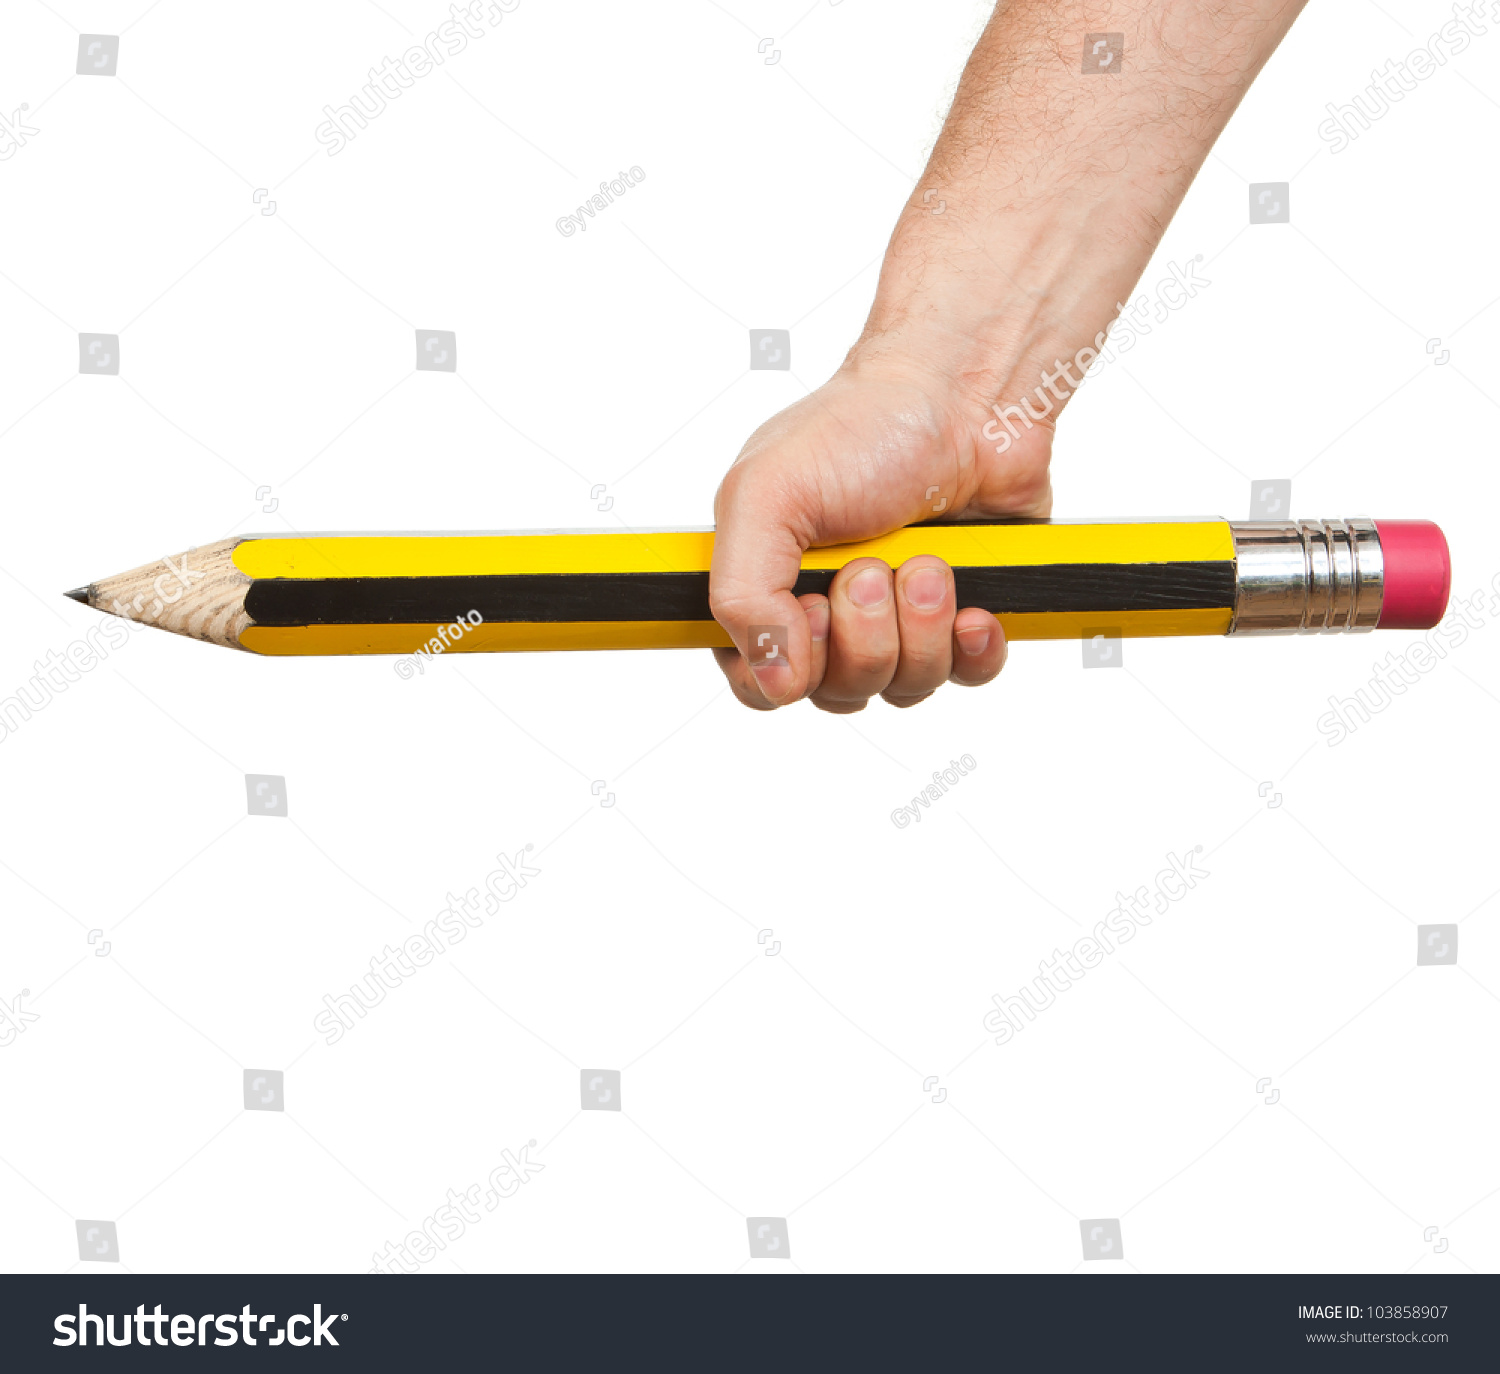 stock-photo-hand-holding-long-pencil-with-erasure-isolated-on-white-background-103858907.jpg